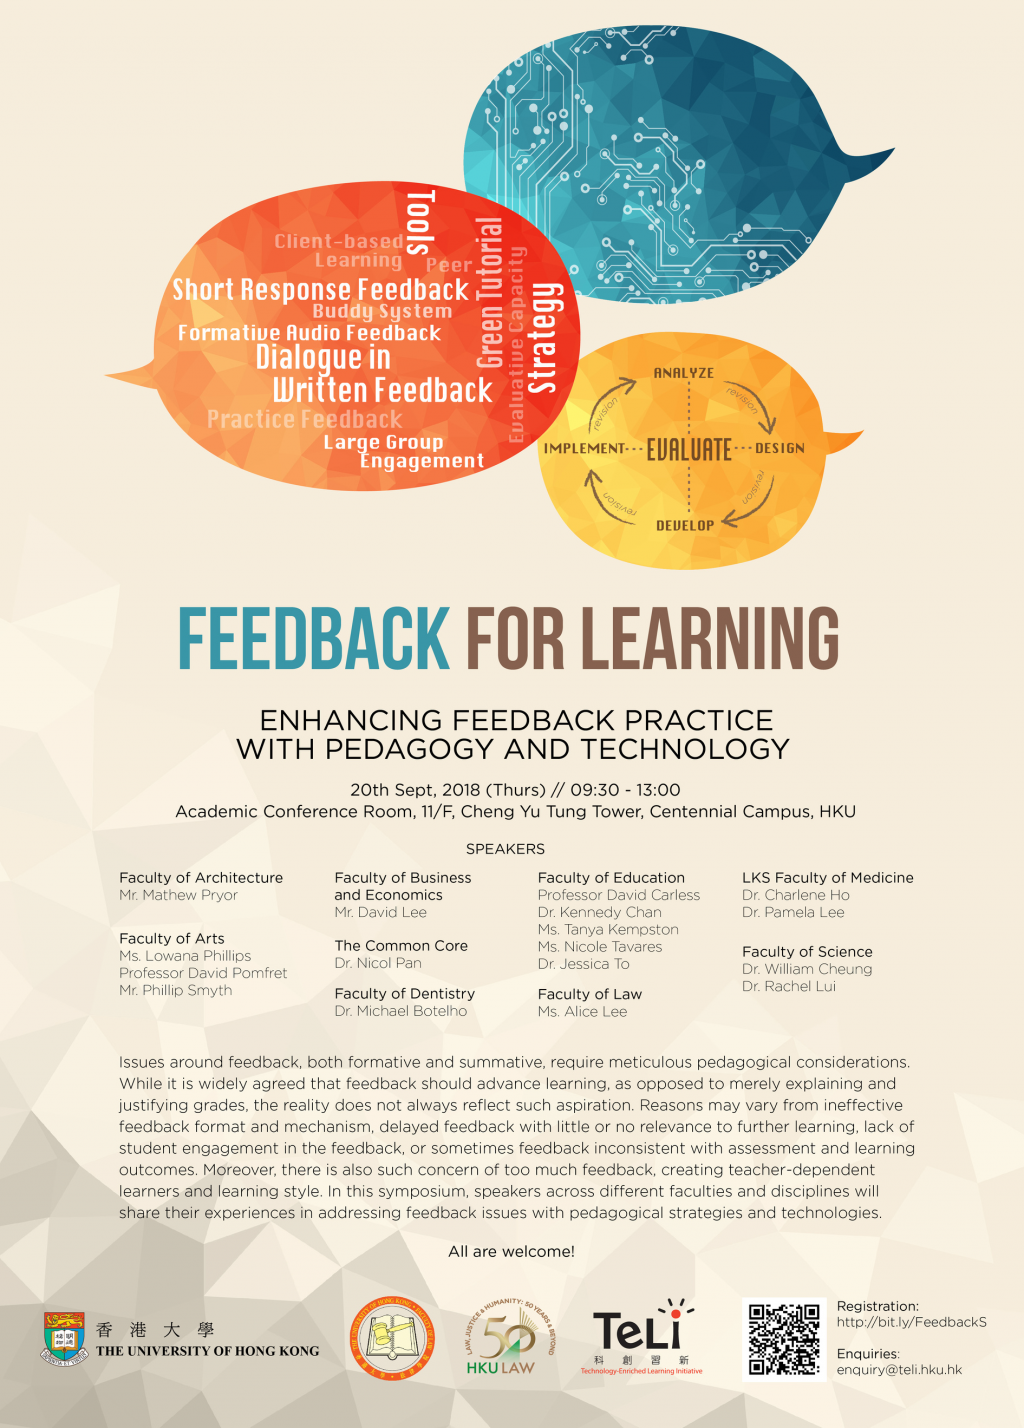 Feedback for Learning - Enhancing Feedback Practice with Pedagogy and Technology Symposium